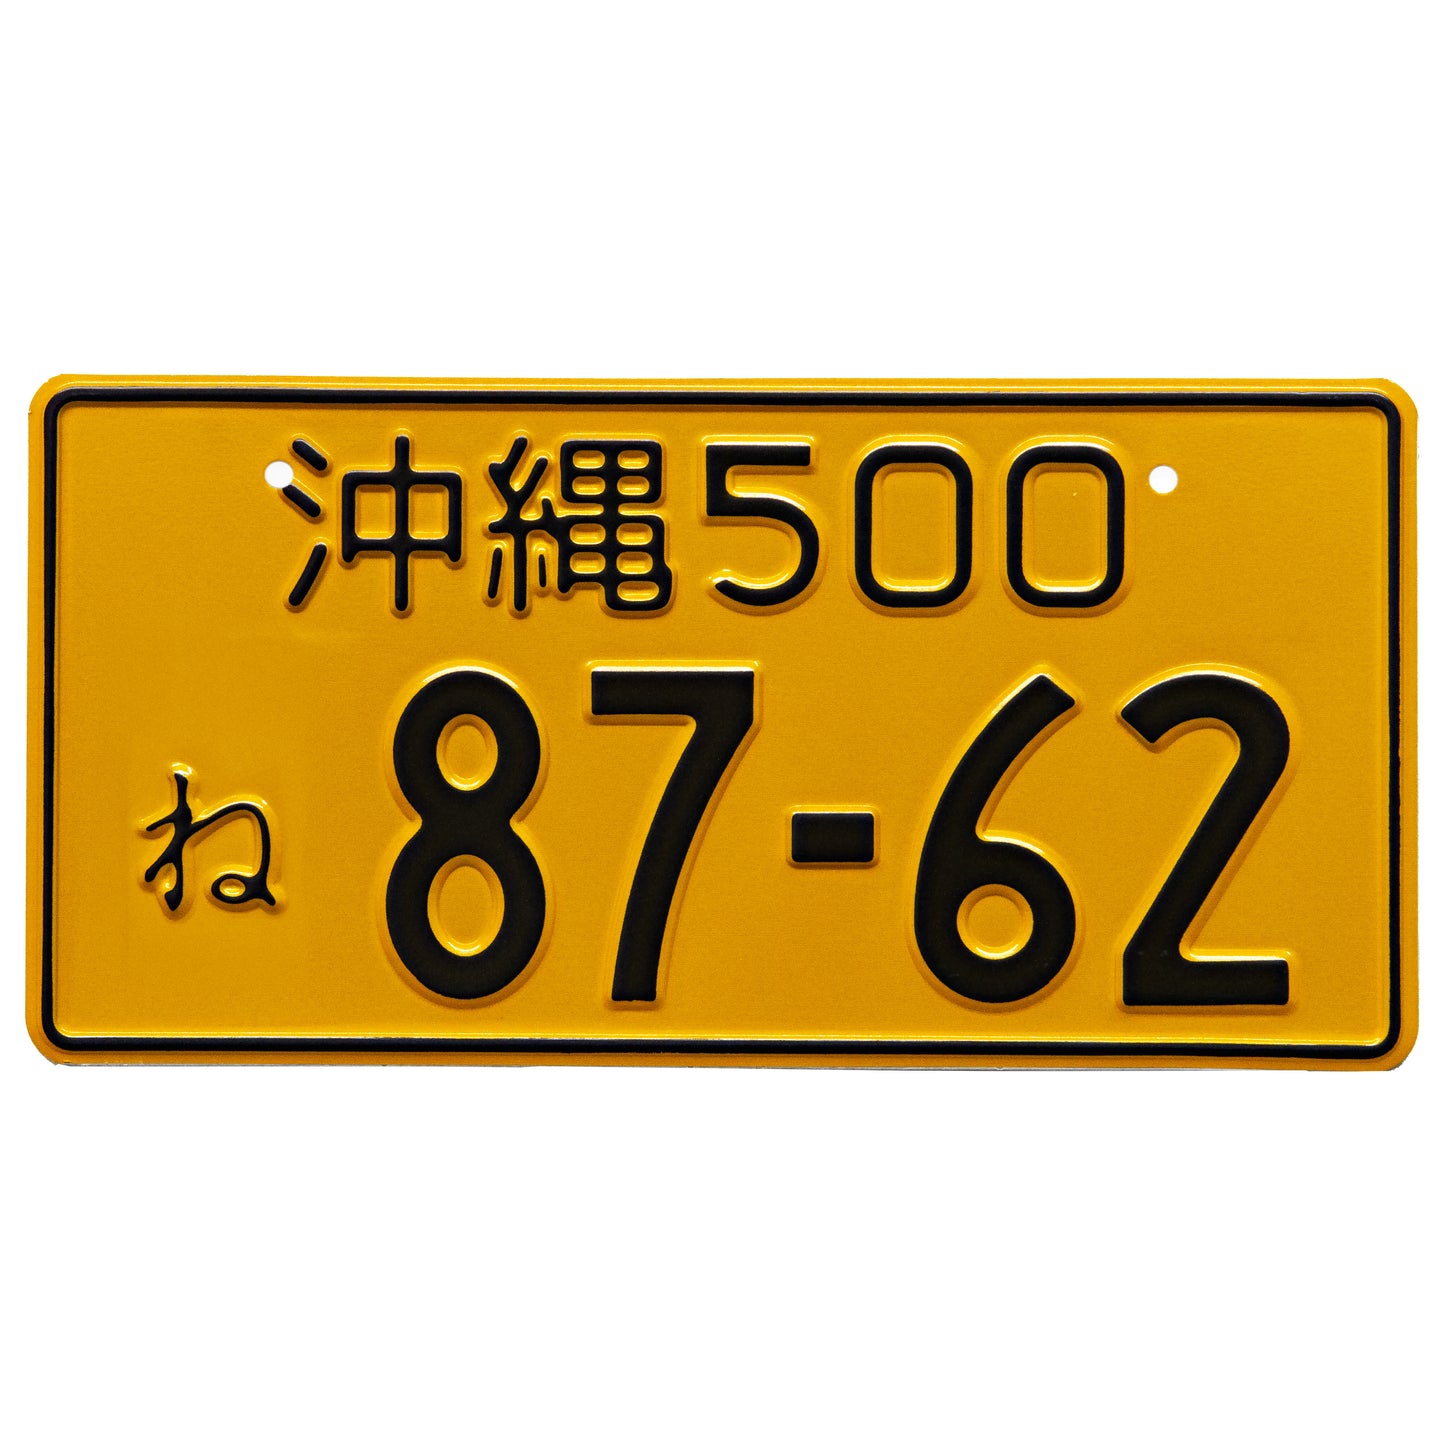 Japanese license plate reflective yellow with black text front view